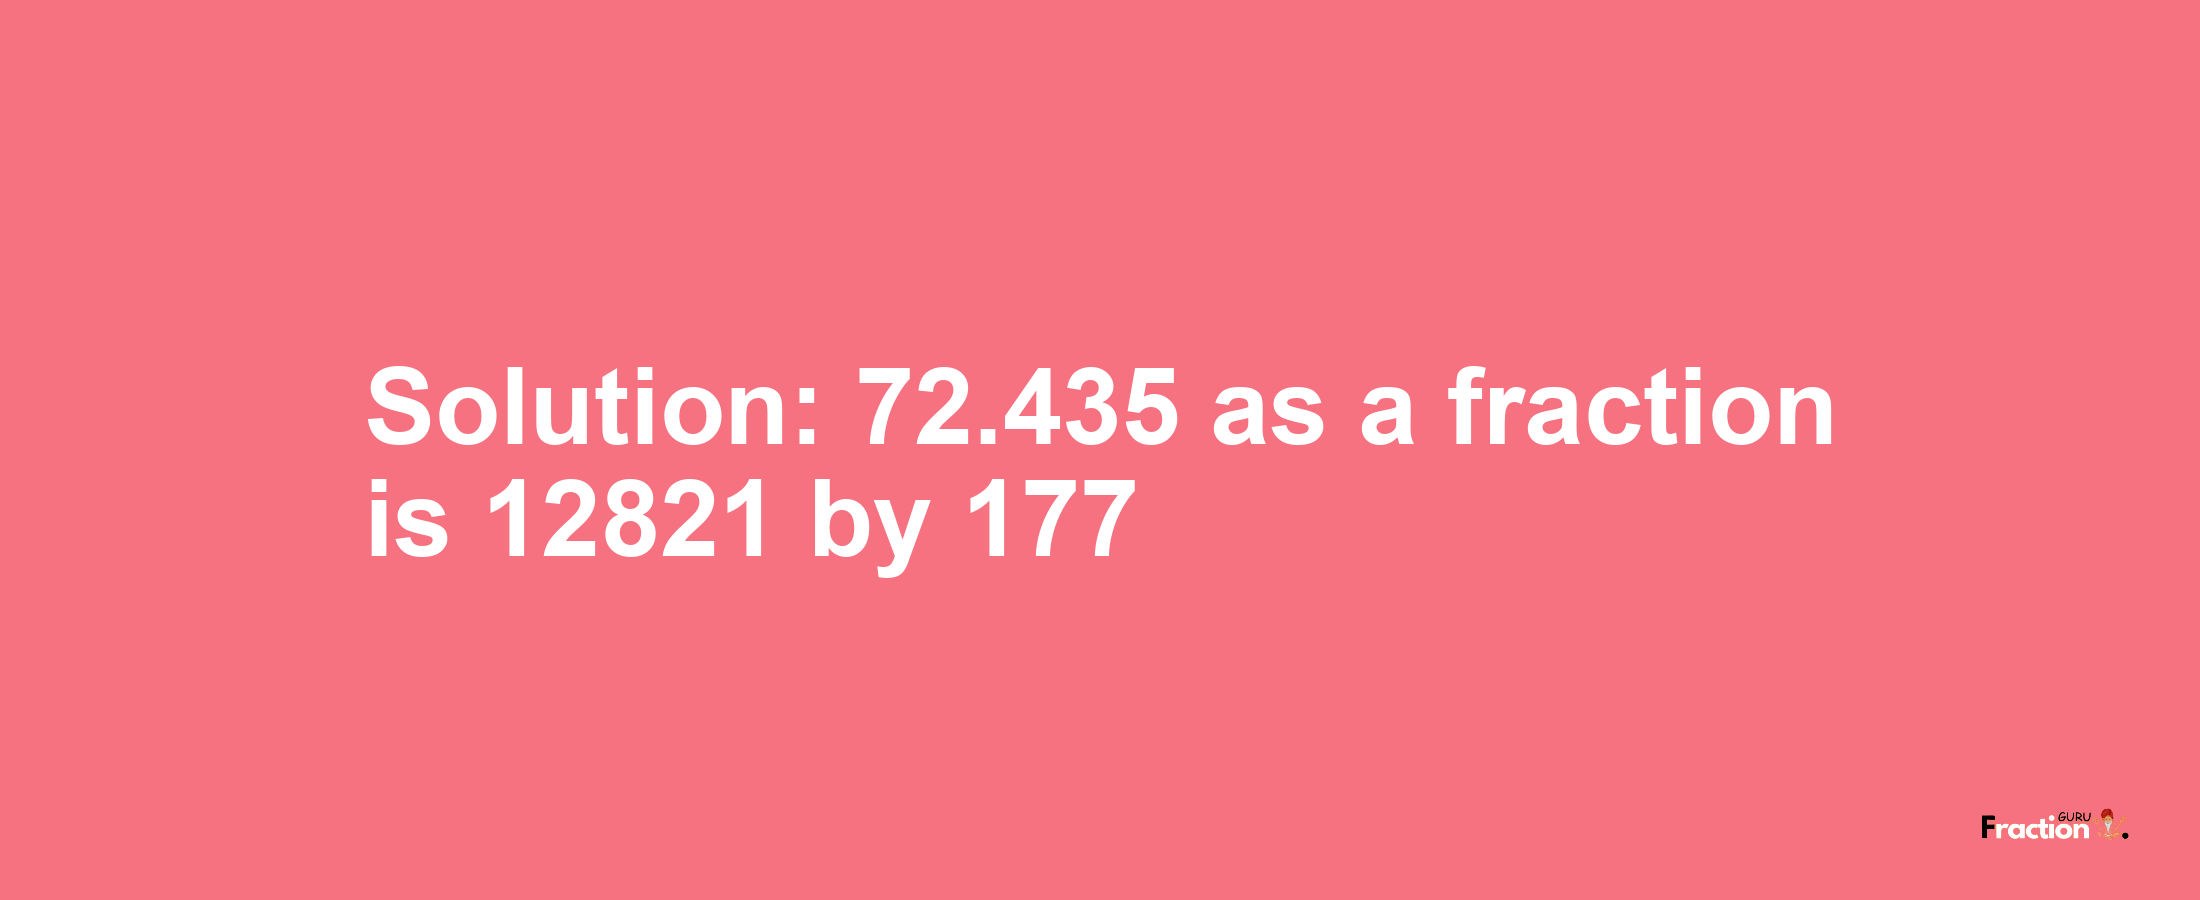 Solution:72.435 as a fraction is 12821/177